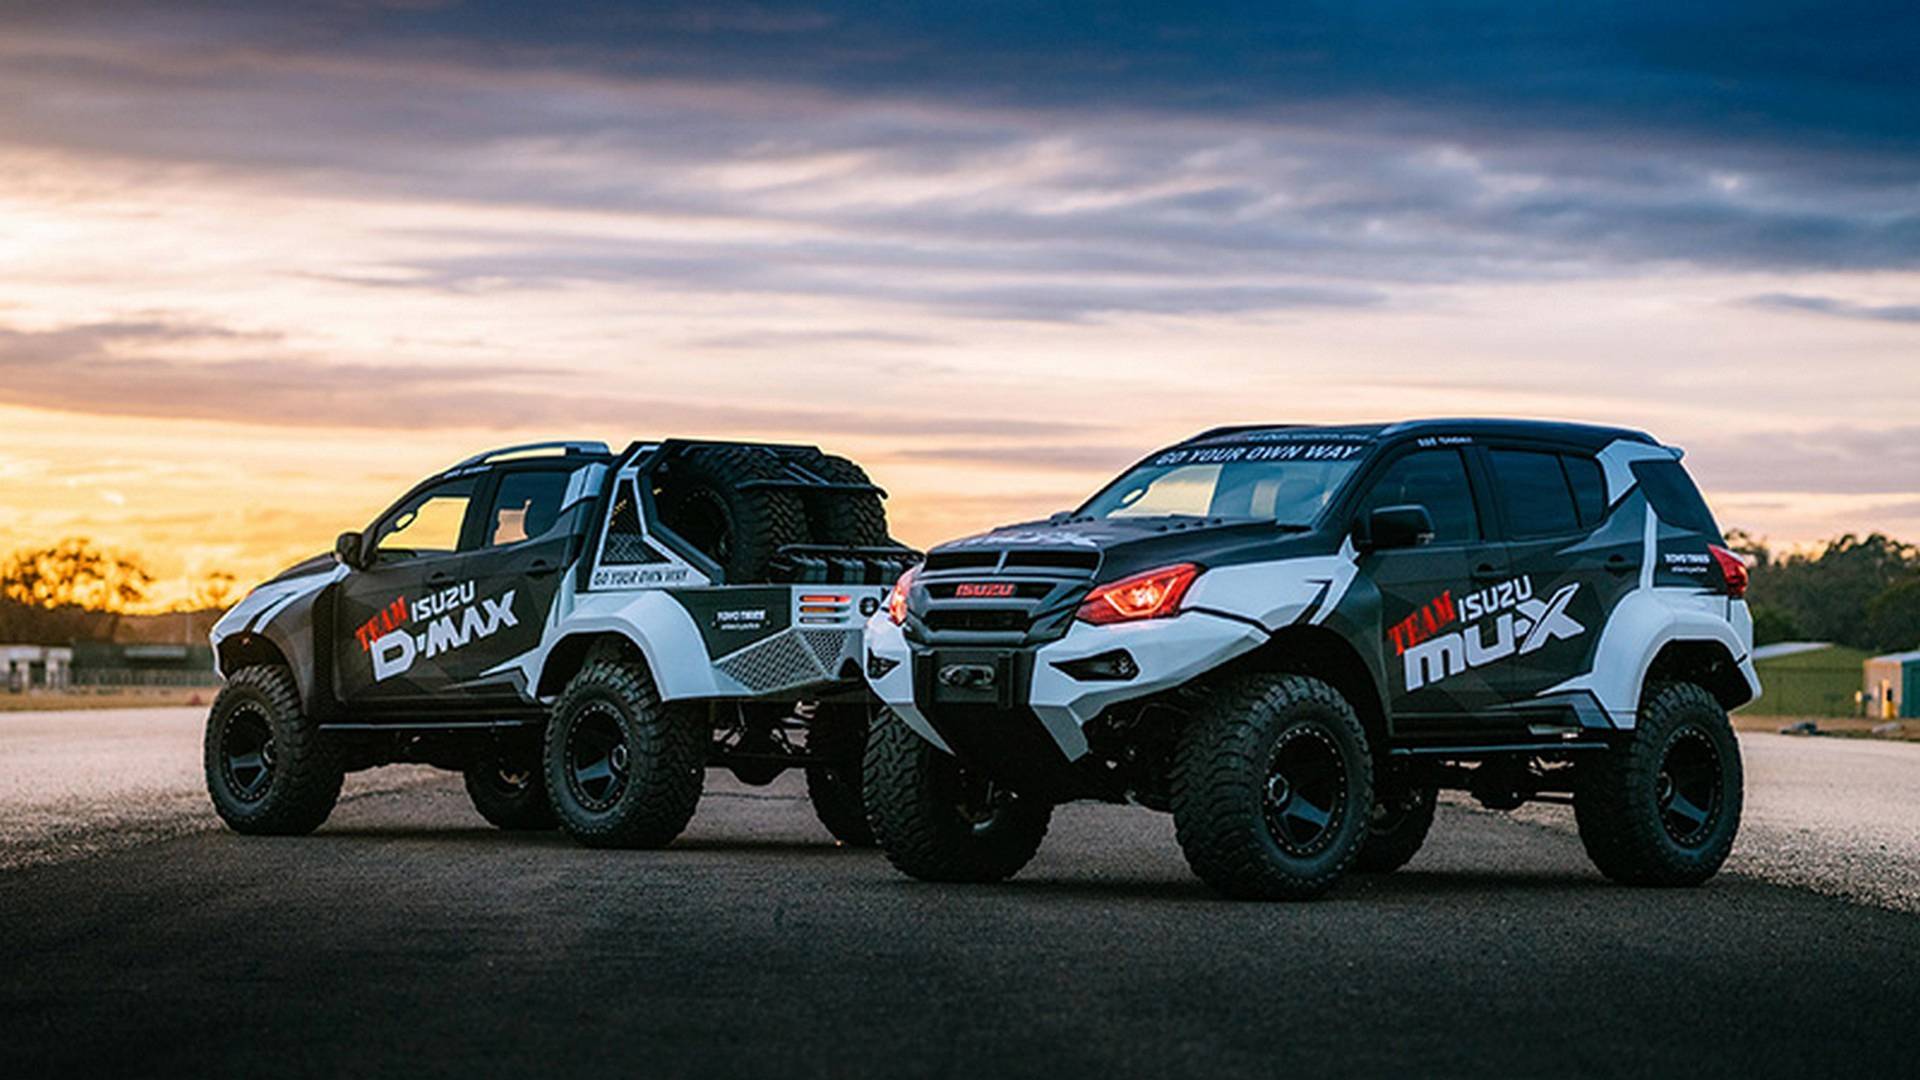 Travel To The End Of The World And Back With The Isuzu Concept X